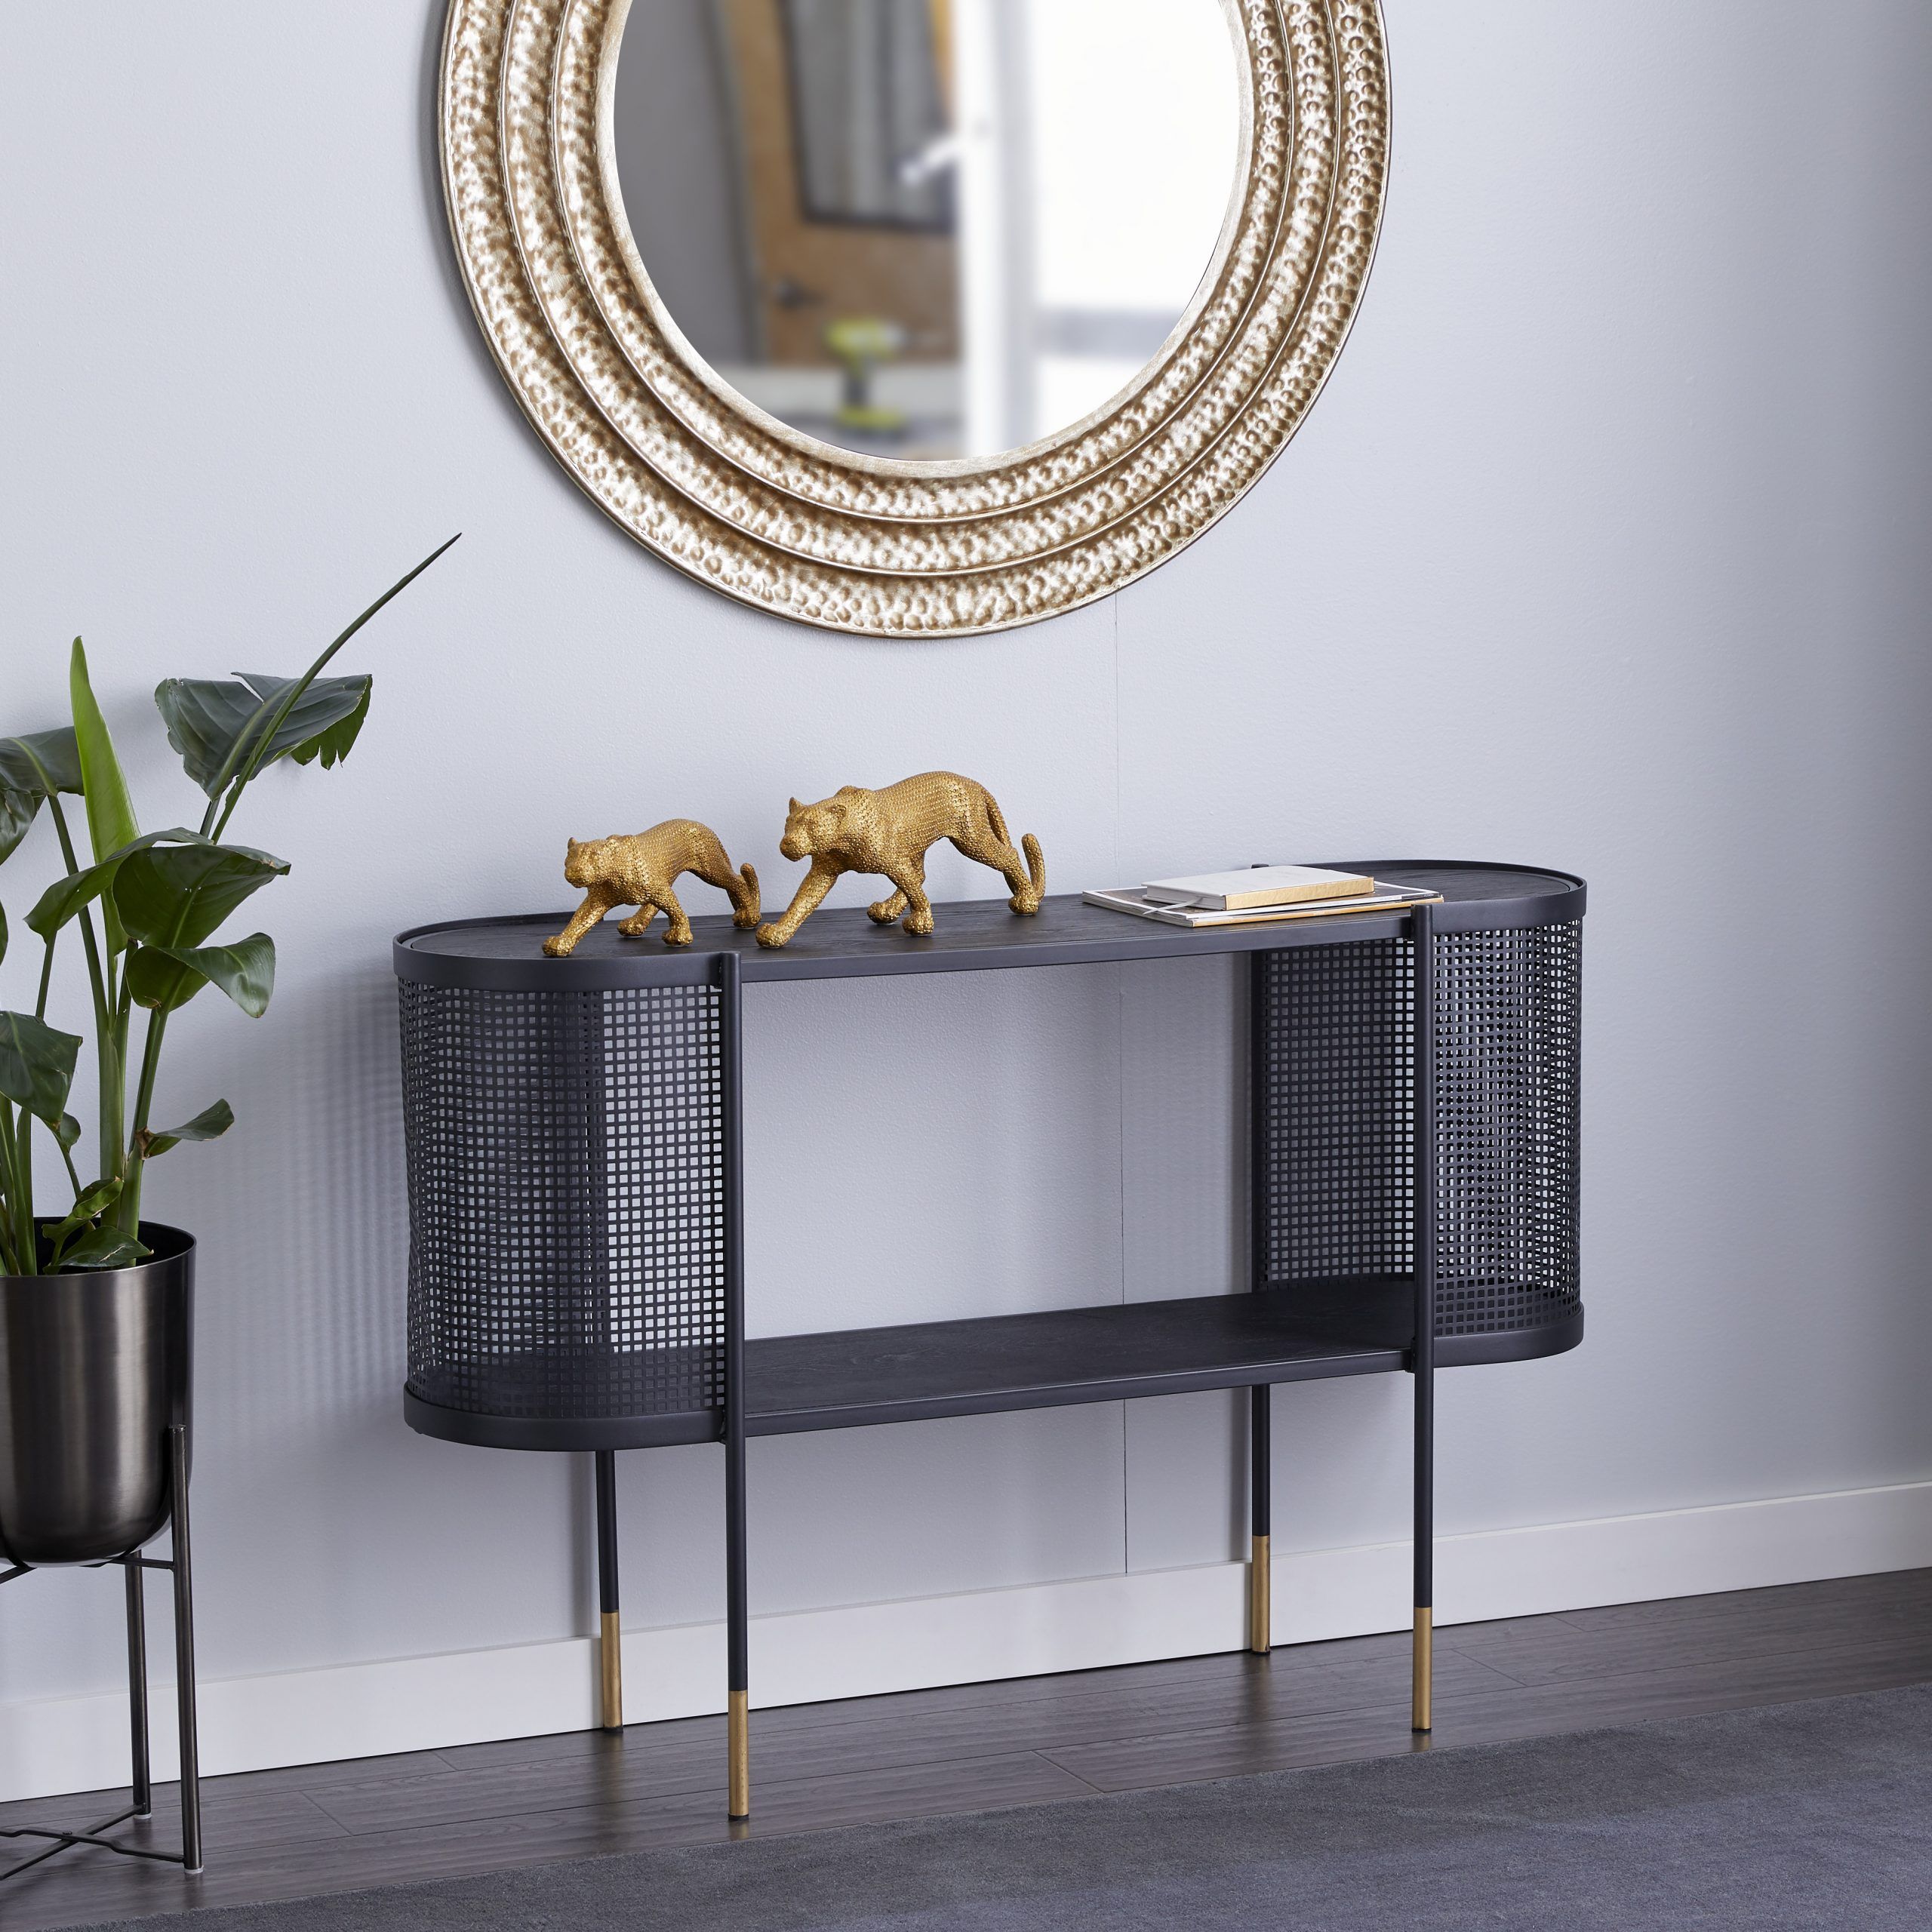 2019 1 Shelf Square Console Tables In Decmode Oval Black Metal Wrapped Console Table With Open (View 3 of 10)